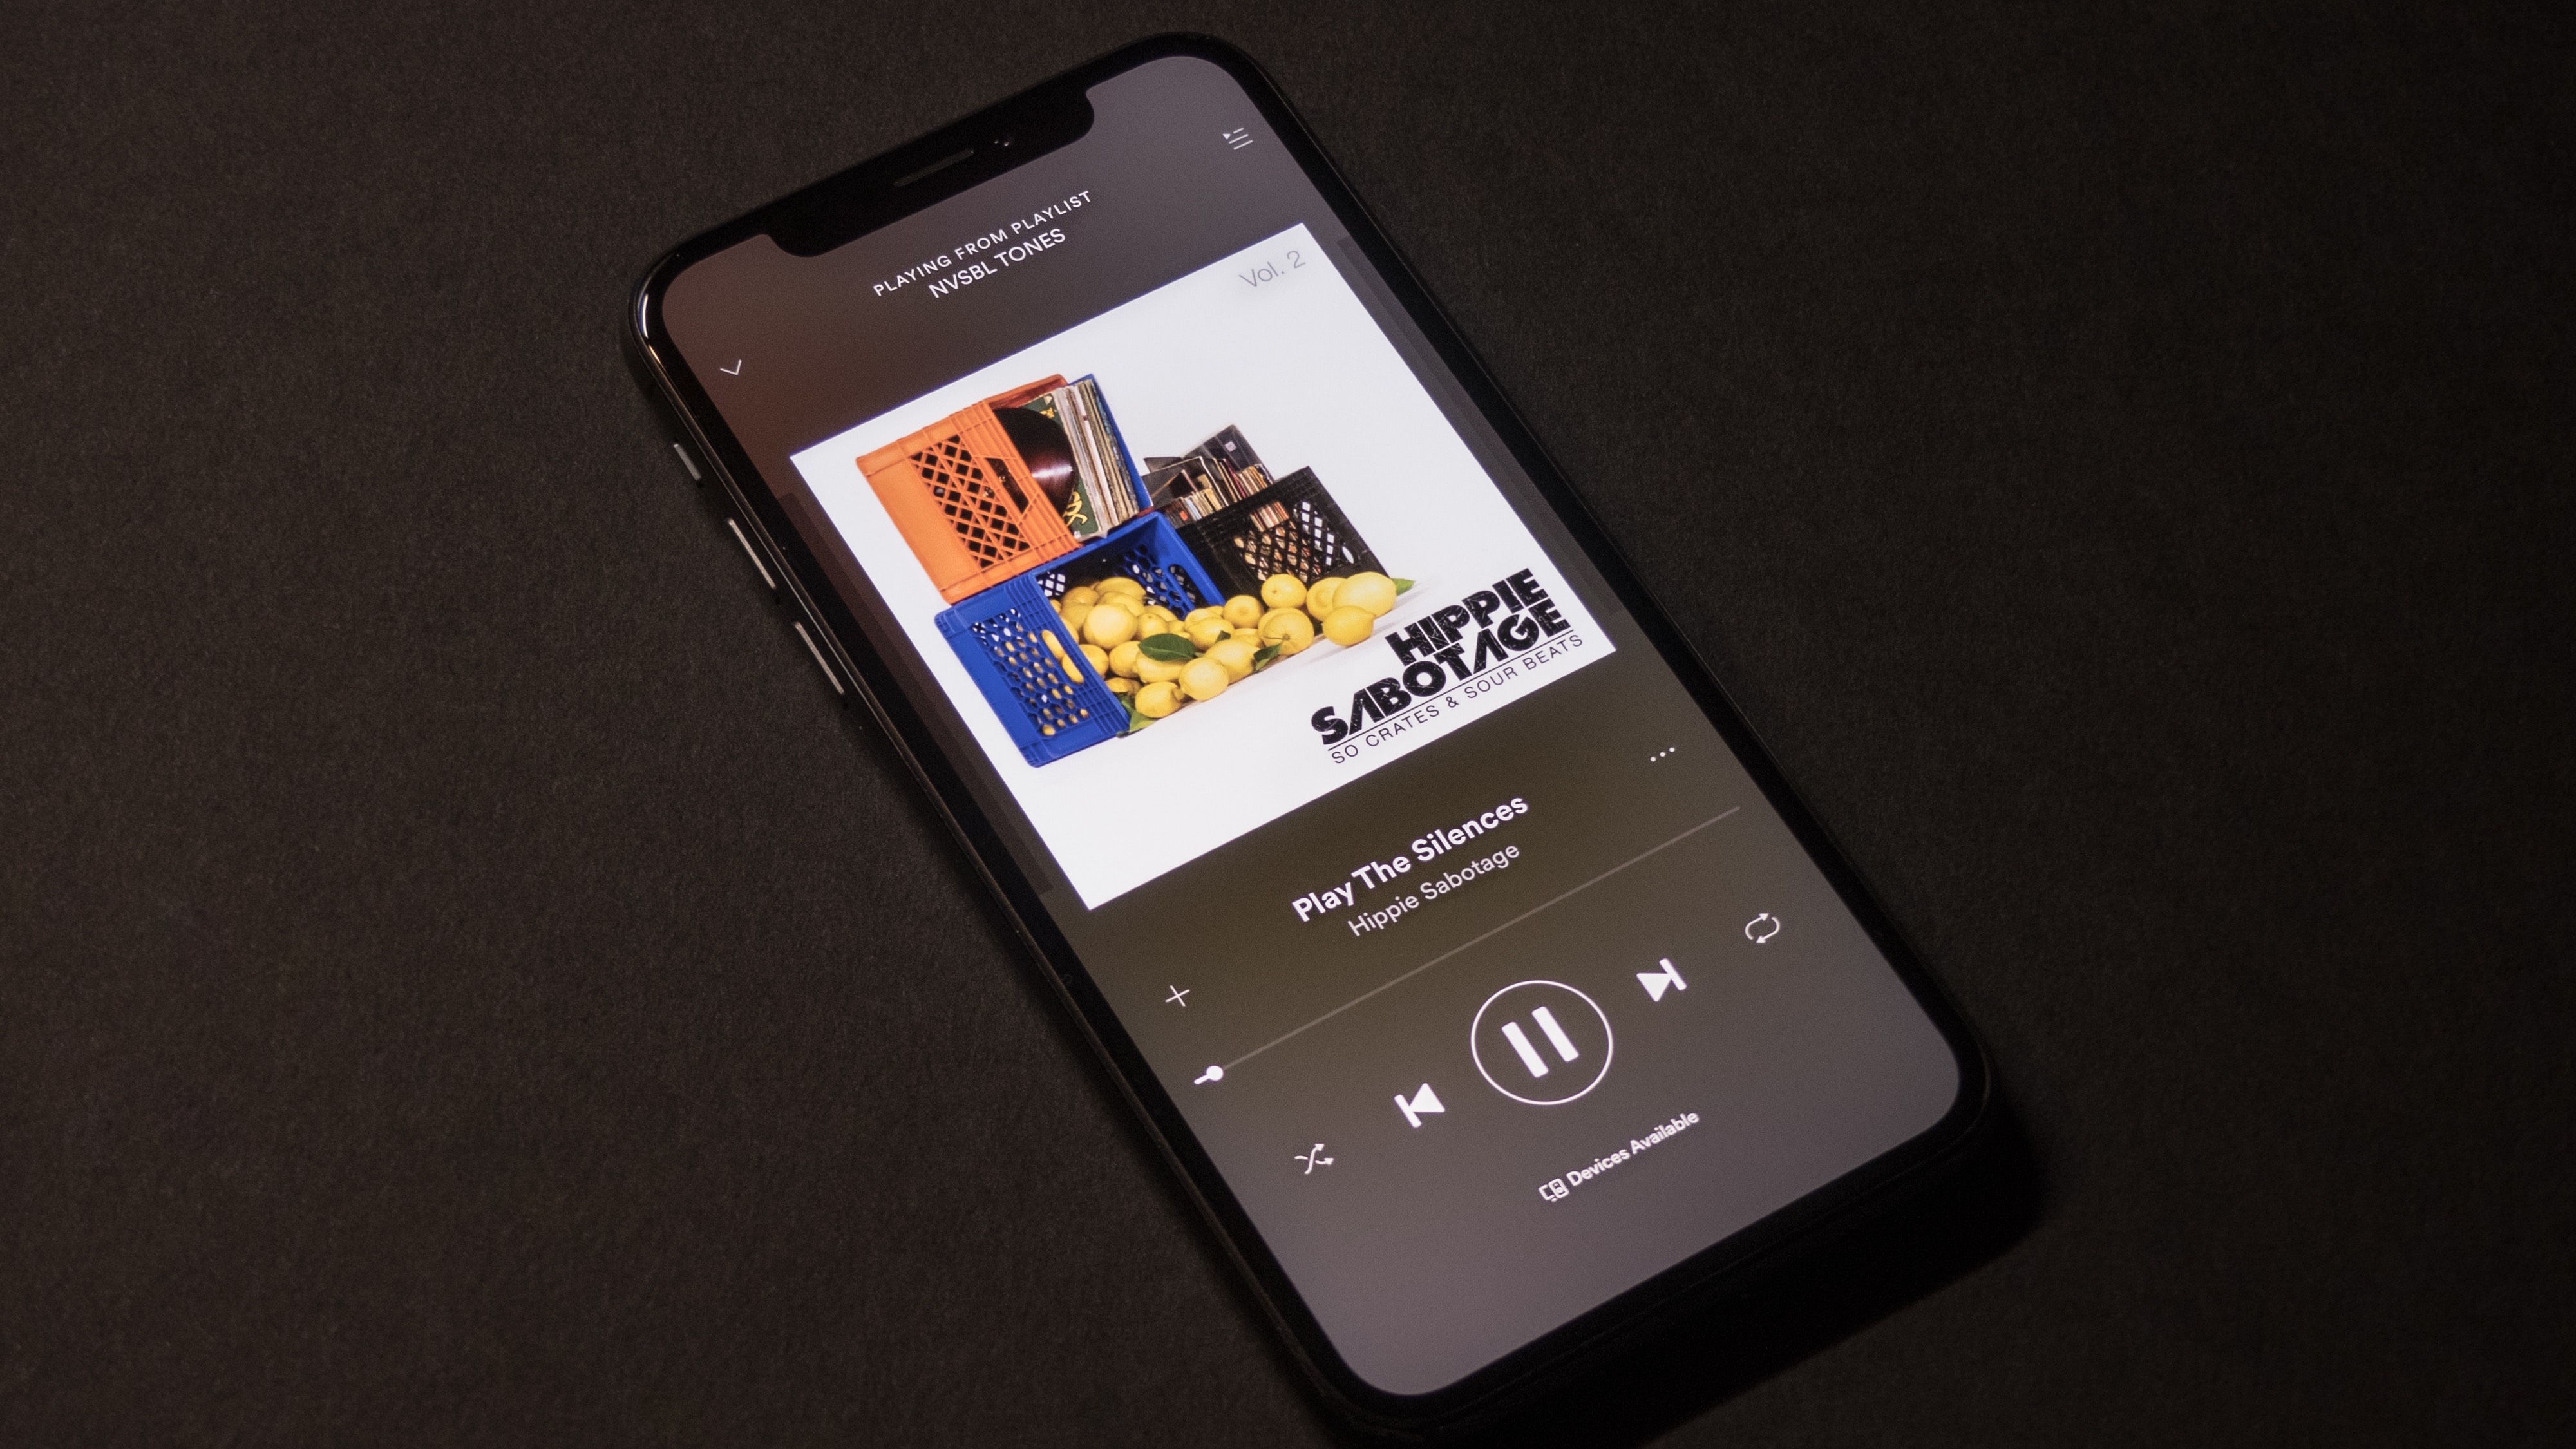 download the new version for ios Spotify 1.2.14.1141